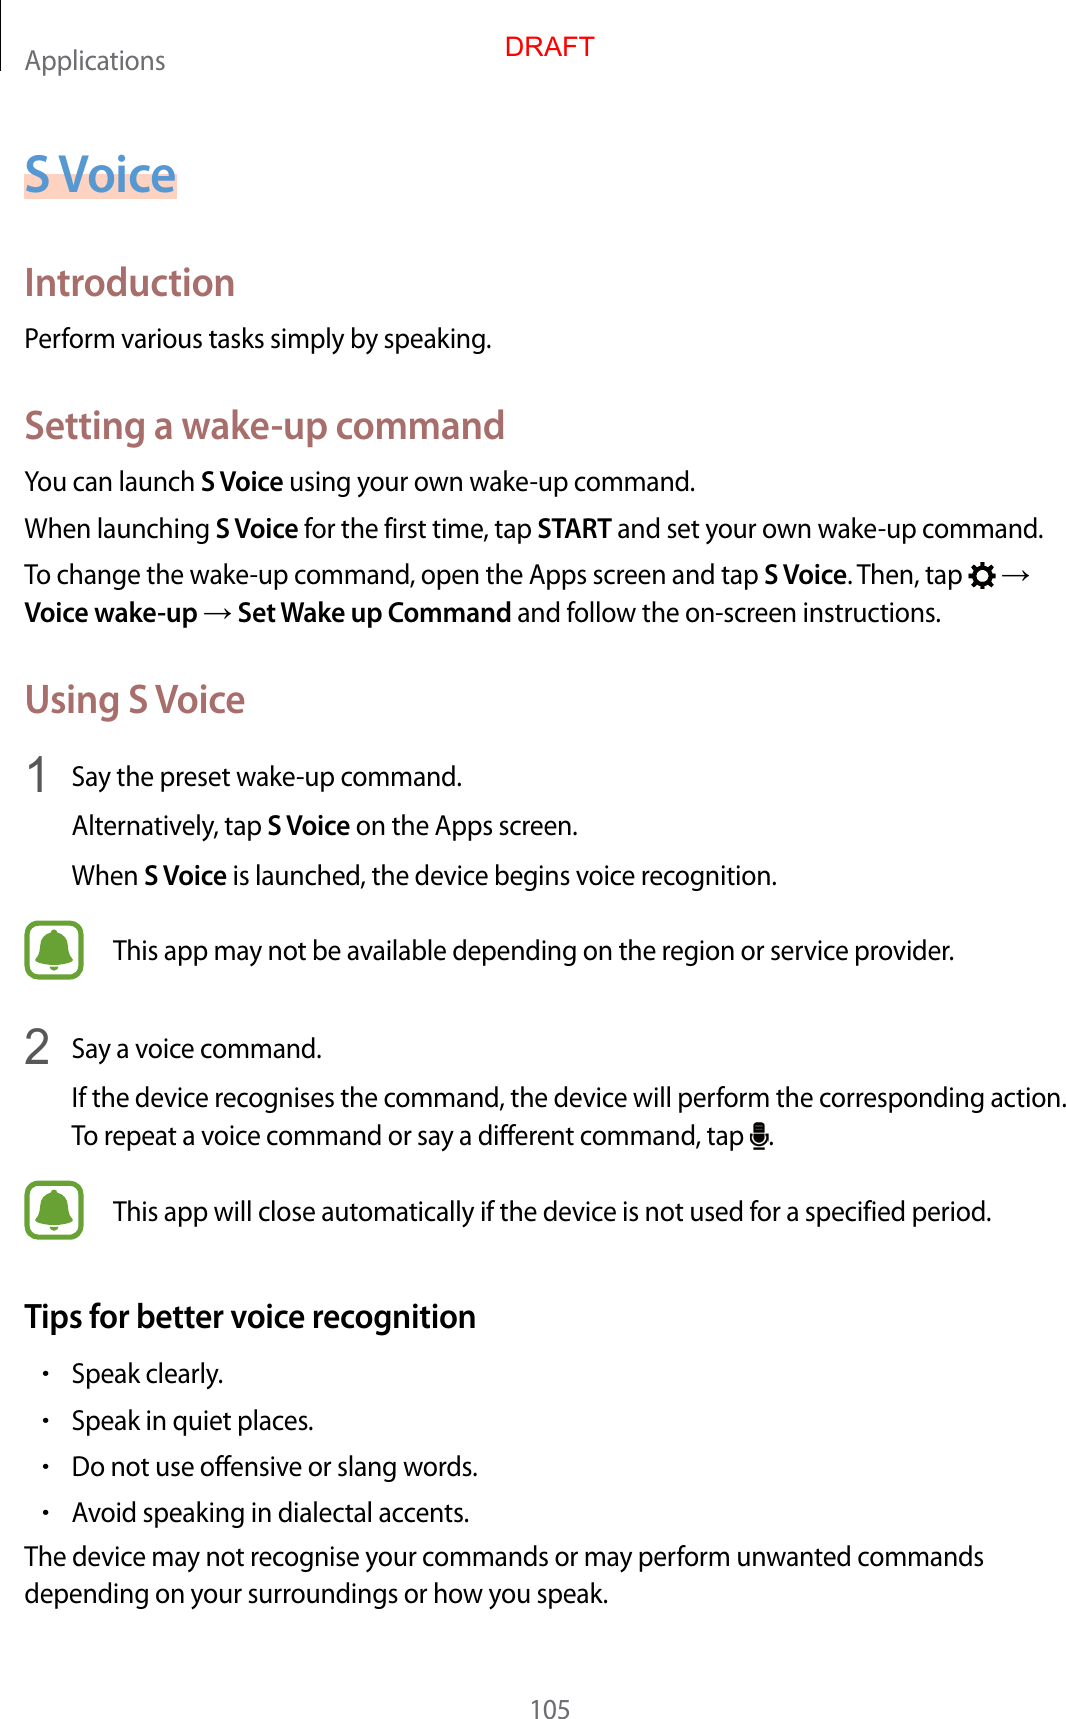 Applications105S V oiceIntroductionP erform various tasks simply by speaking.Setting a wake-up commandYou can launch S V oice using your own w ake-up command.When launching S V oice for the first time , tap START and set your own w ake-up command.To change the wake-up command, open the A pps scr een and tap S V oice. Then, tap    Voice wak e-up  Set Wake up Command and follo w the on-scr een instructions.Using S Voice1  Say the preset w ake-up command .Alternativ ely, tap S V oice on the Apps screen.When S V oice is launched, the device beg ins v oic e r ecog nition.This app may not be a vailable depending on the r eg ion or service provider.2  Say a voic e command .If the device recog nises the command , the devic e will perform the c orresponding action. To repeat a v oic e command or sa y a diff er en t command , tap  .This app will close automatically if the devic e is not used f or a specified period .T ips f or bett er v oic e r ec ognition•Speak clearly.•Speak in quiet places.•Do not use offensiv e or slang w or ds .•A v oid speaking in dialectal accen ts .The device ma y not r ecog nise y our c ommands or may perform unwant ed c ommands depending on your surroundings or ho w y ou speak.DRAFT